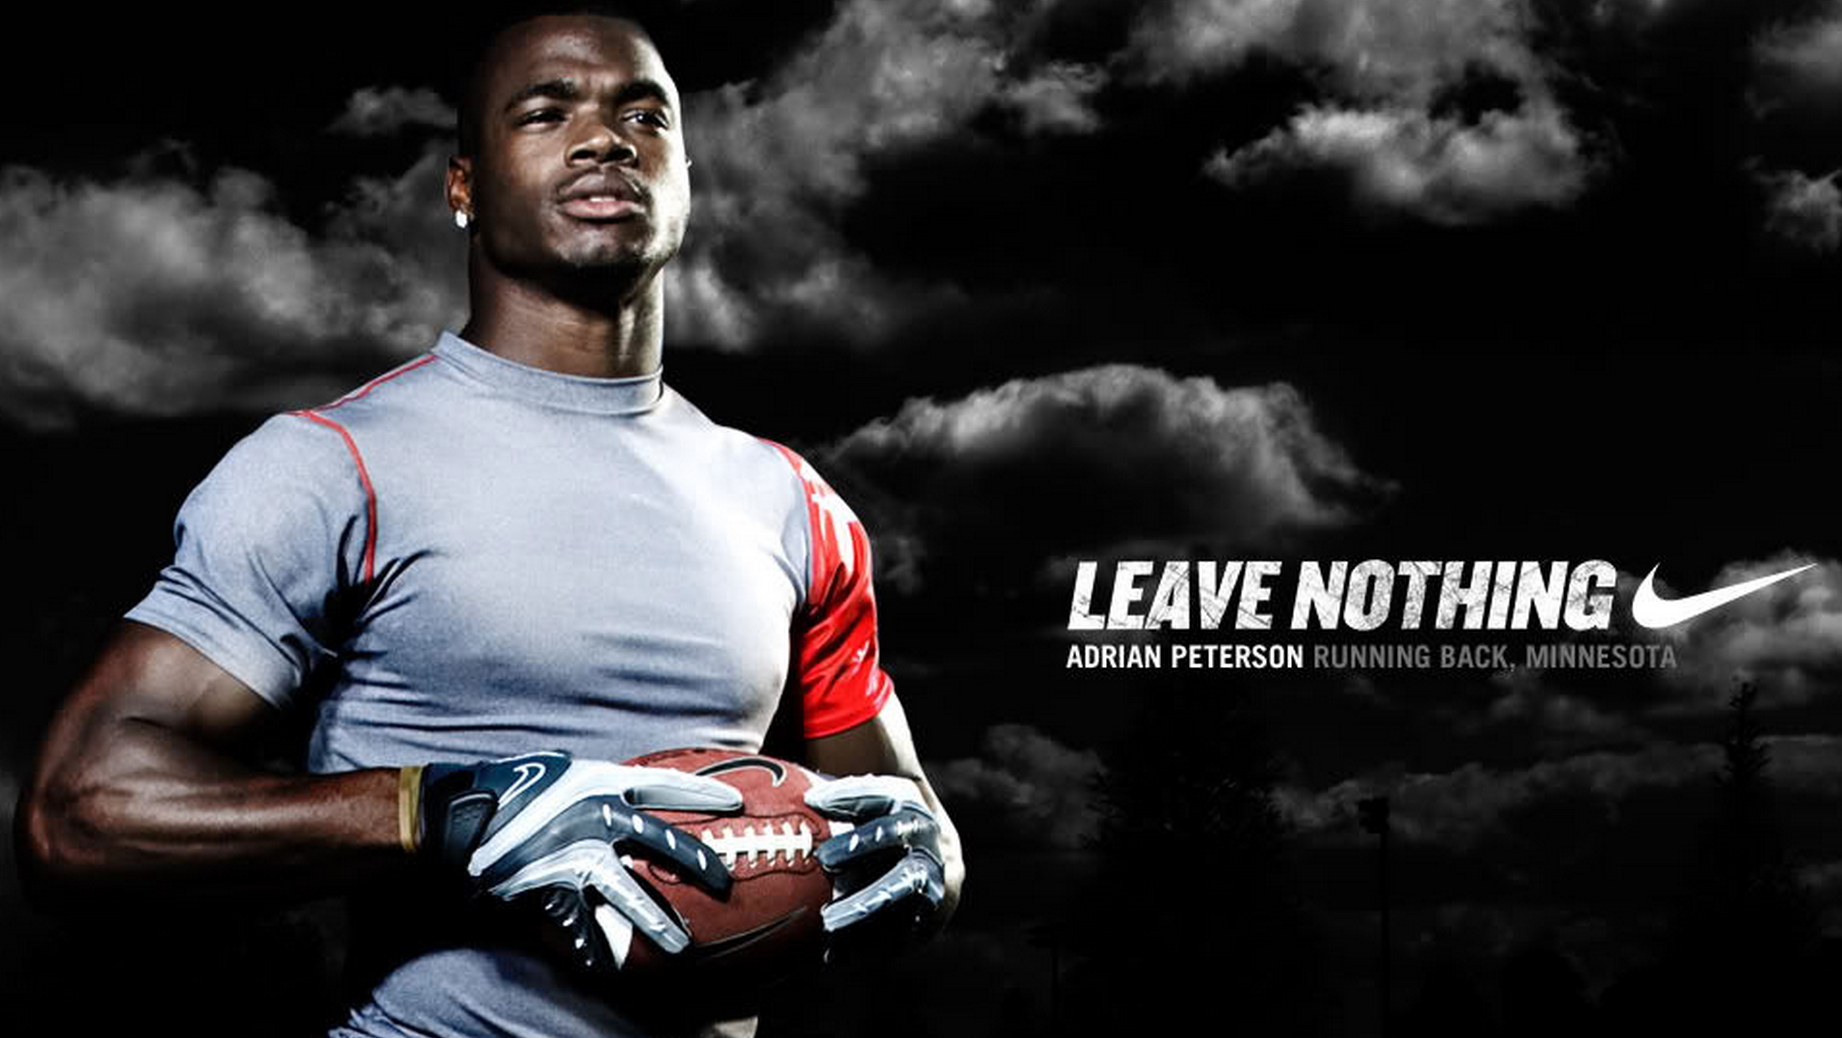 Nike Doesn’t Want To Be Associated With Adrian Peterson Right Now